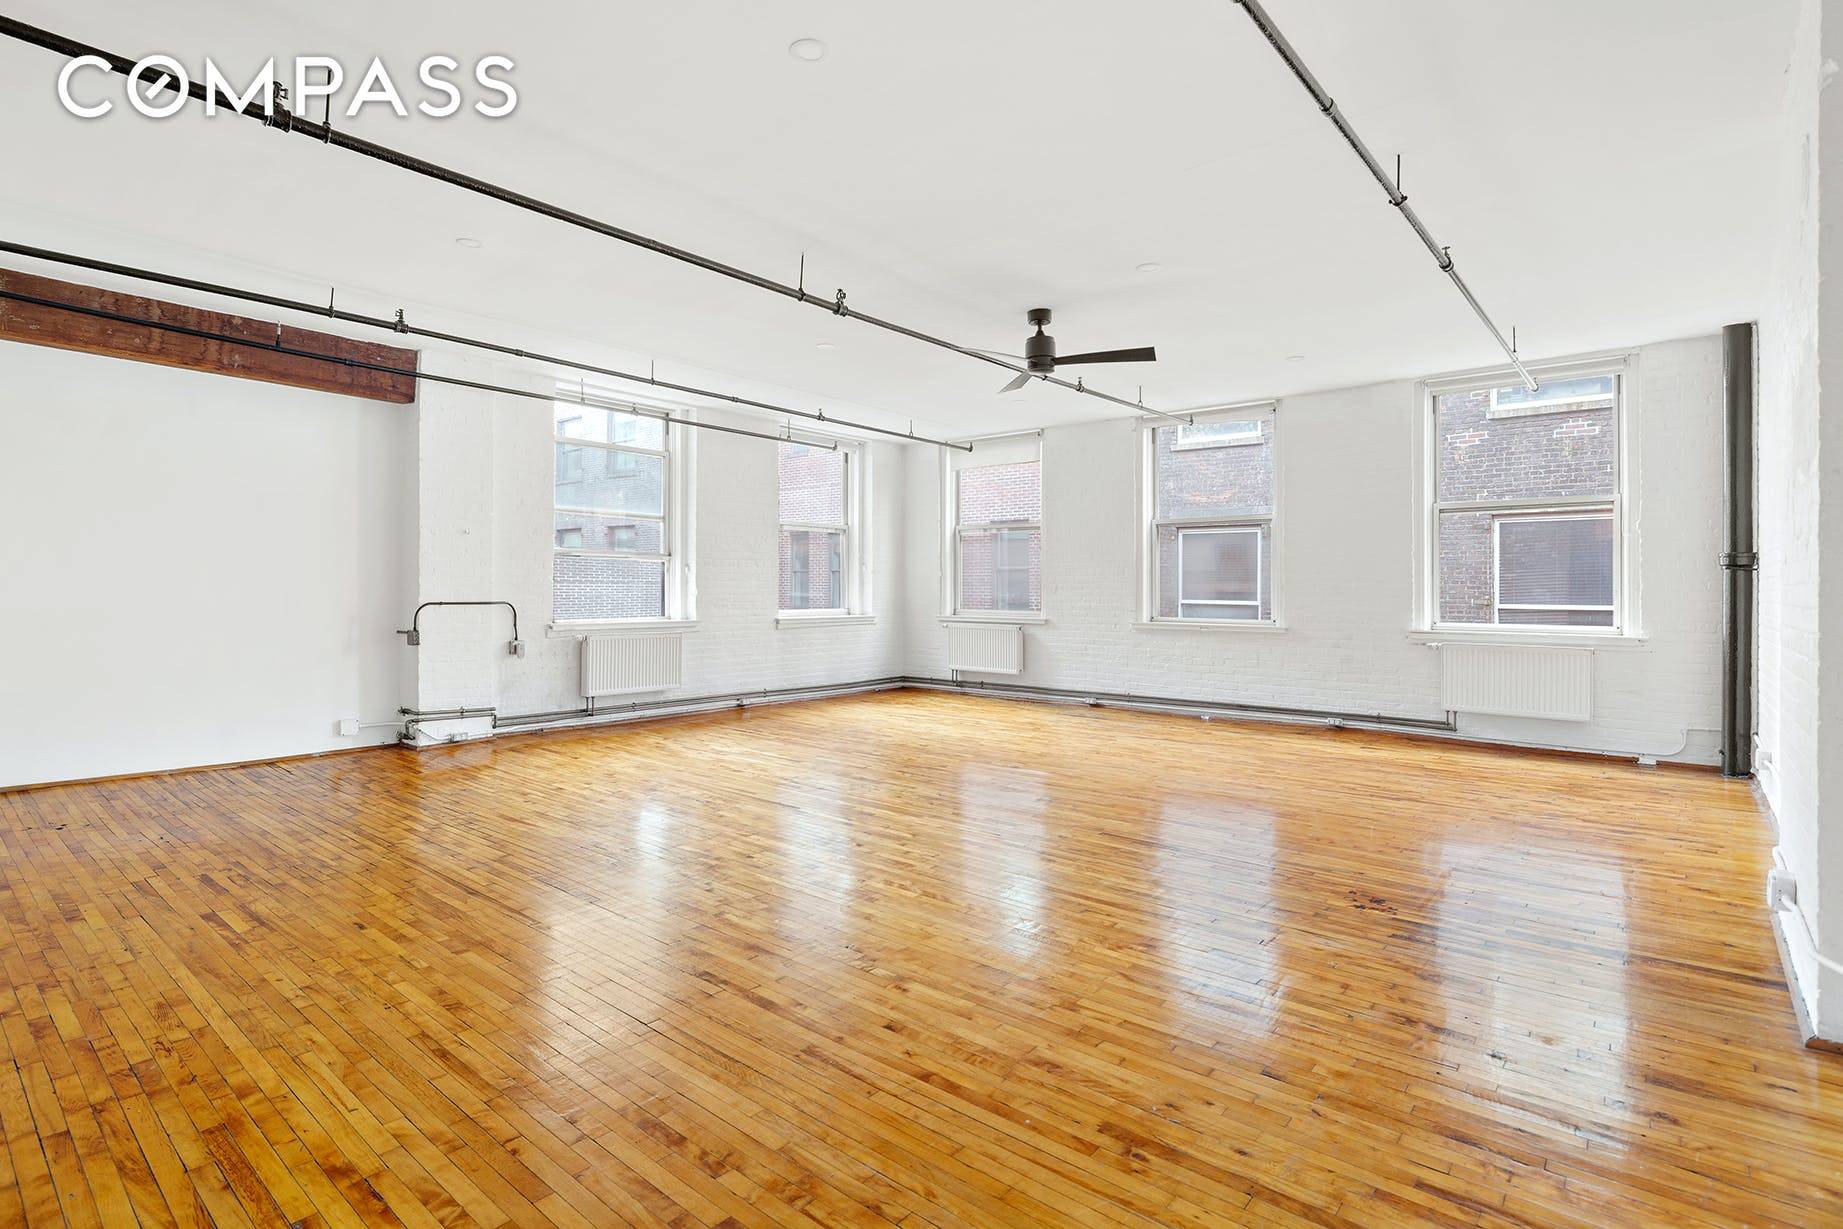 SOHO authentic loft located on Wooster between Prince and Spring in one of the most desired cobblestone streets in NYC.